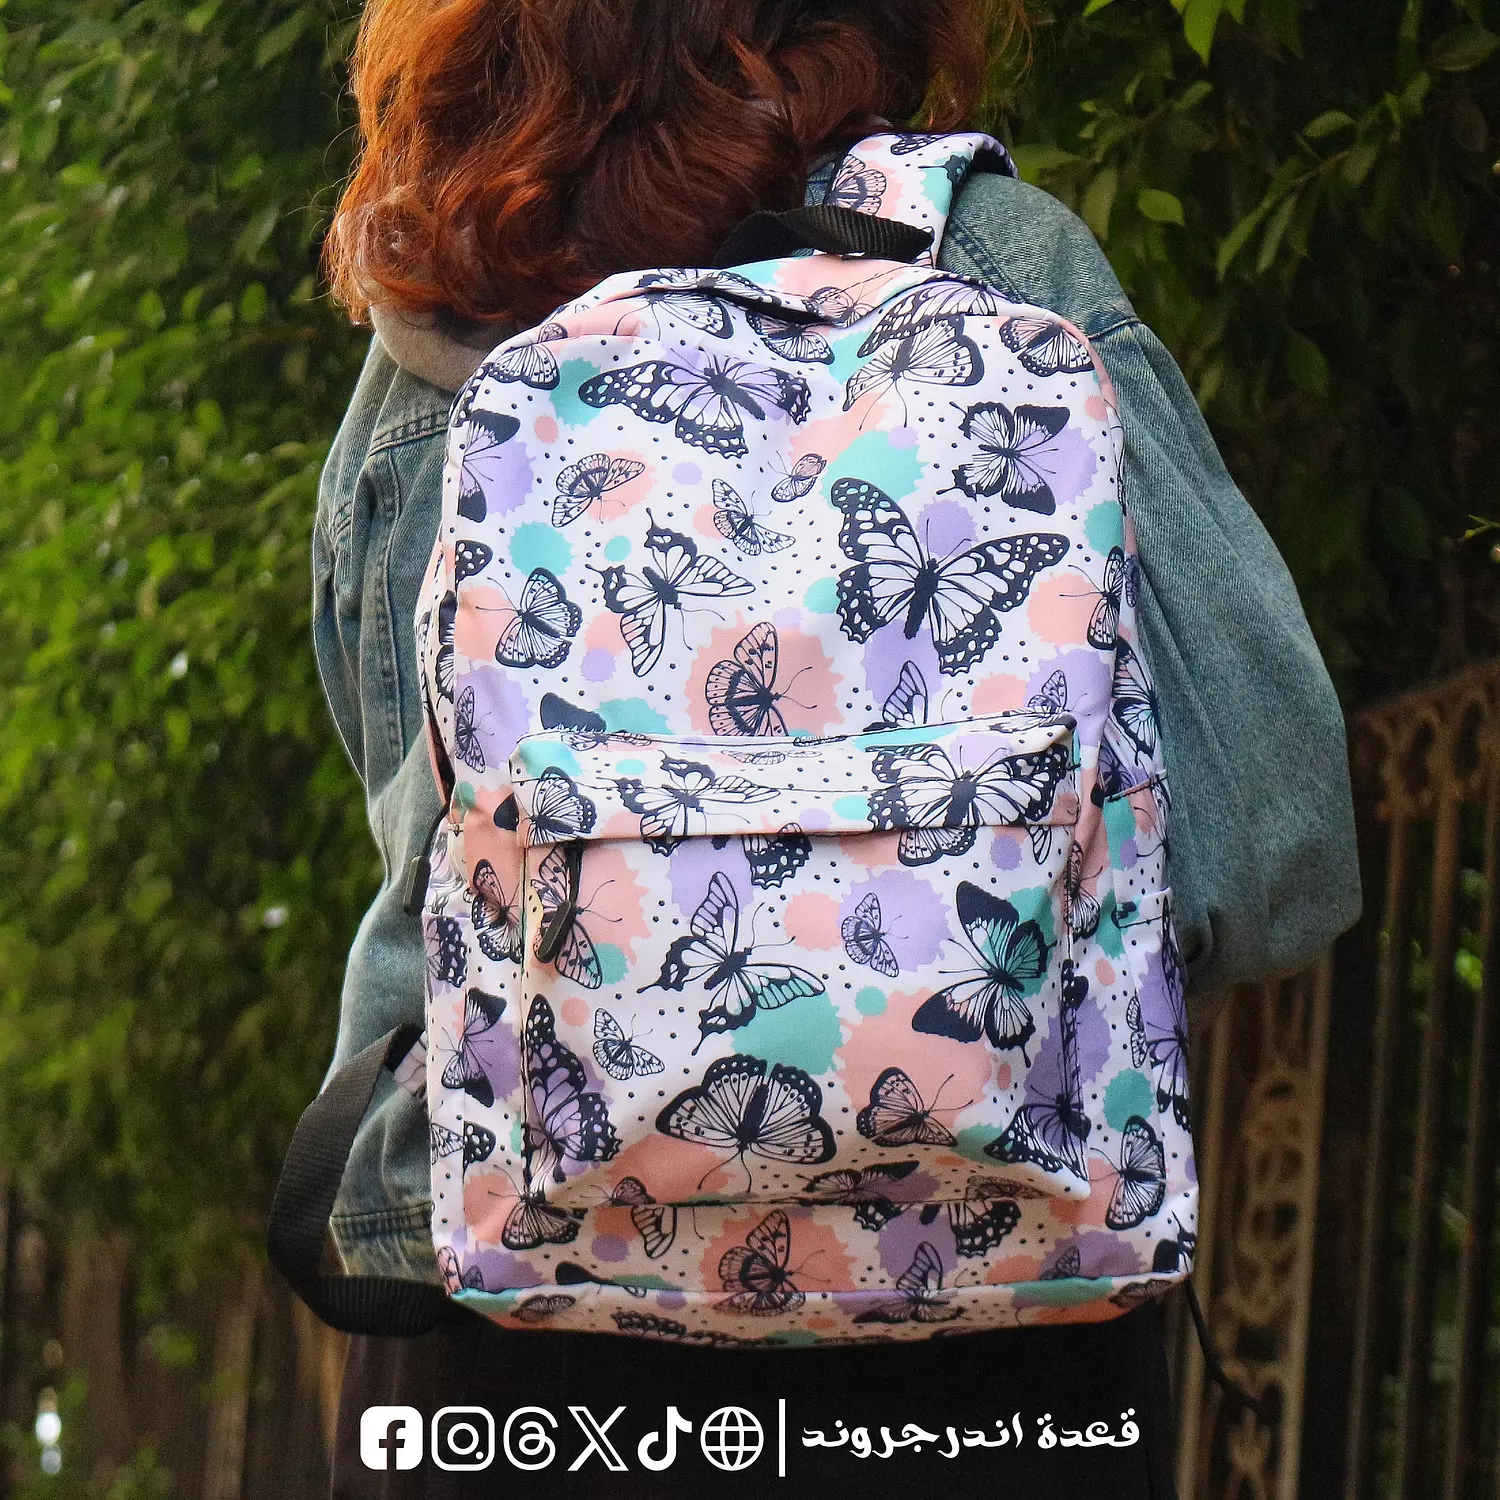 Butterfly 🦋 Backpack 🎒 hover image